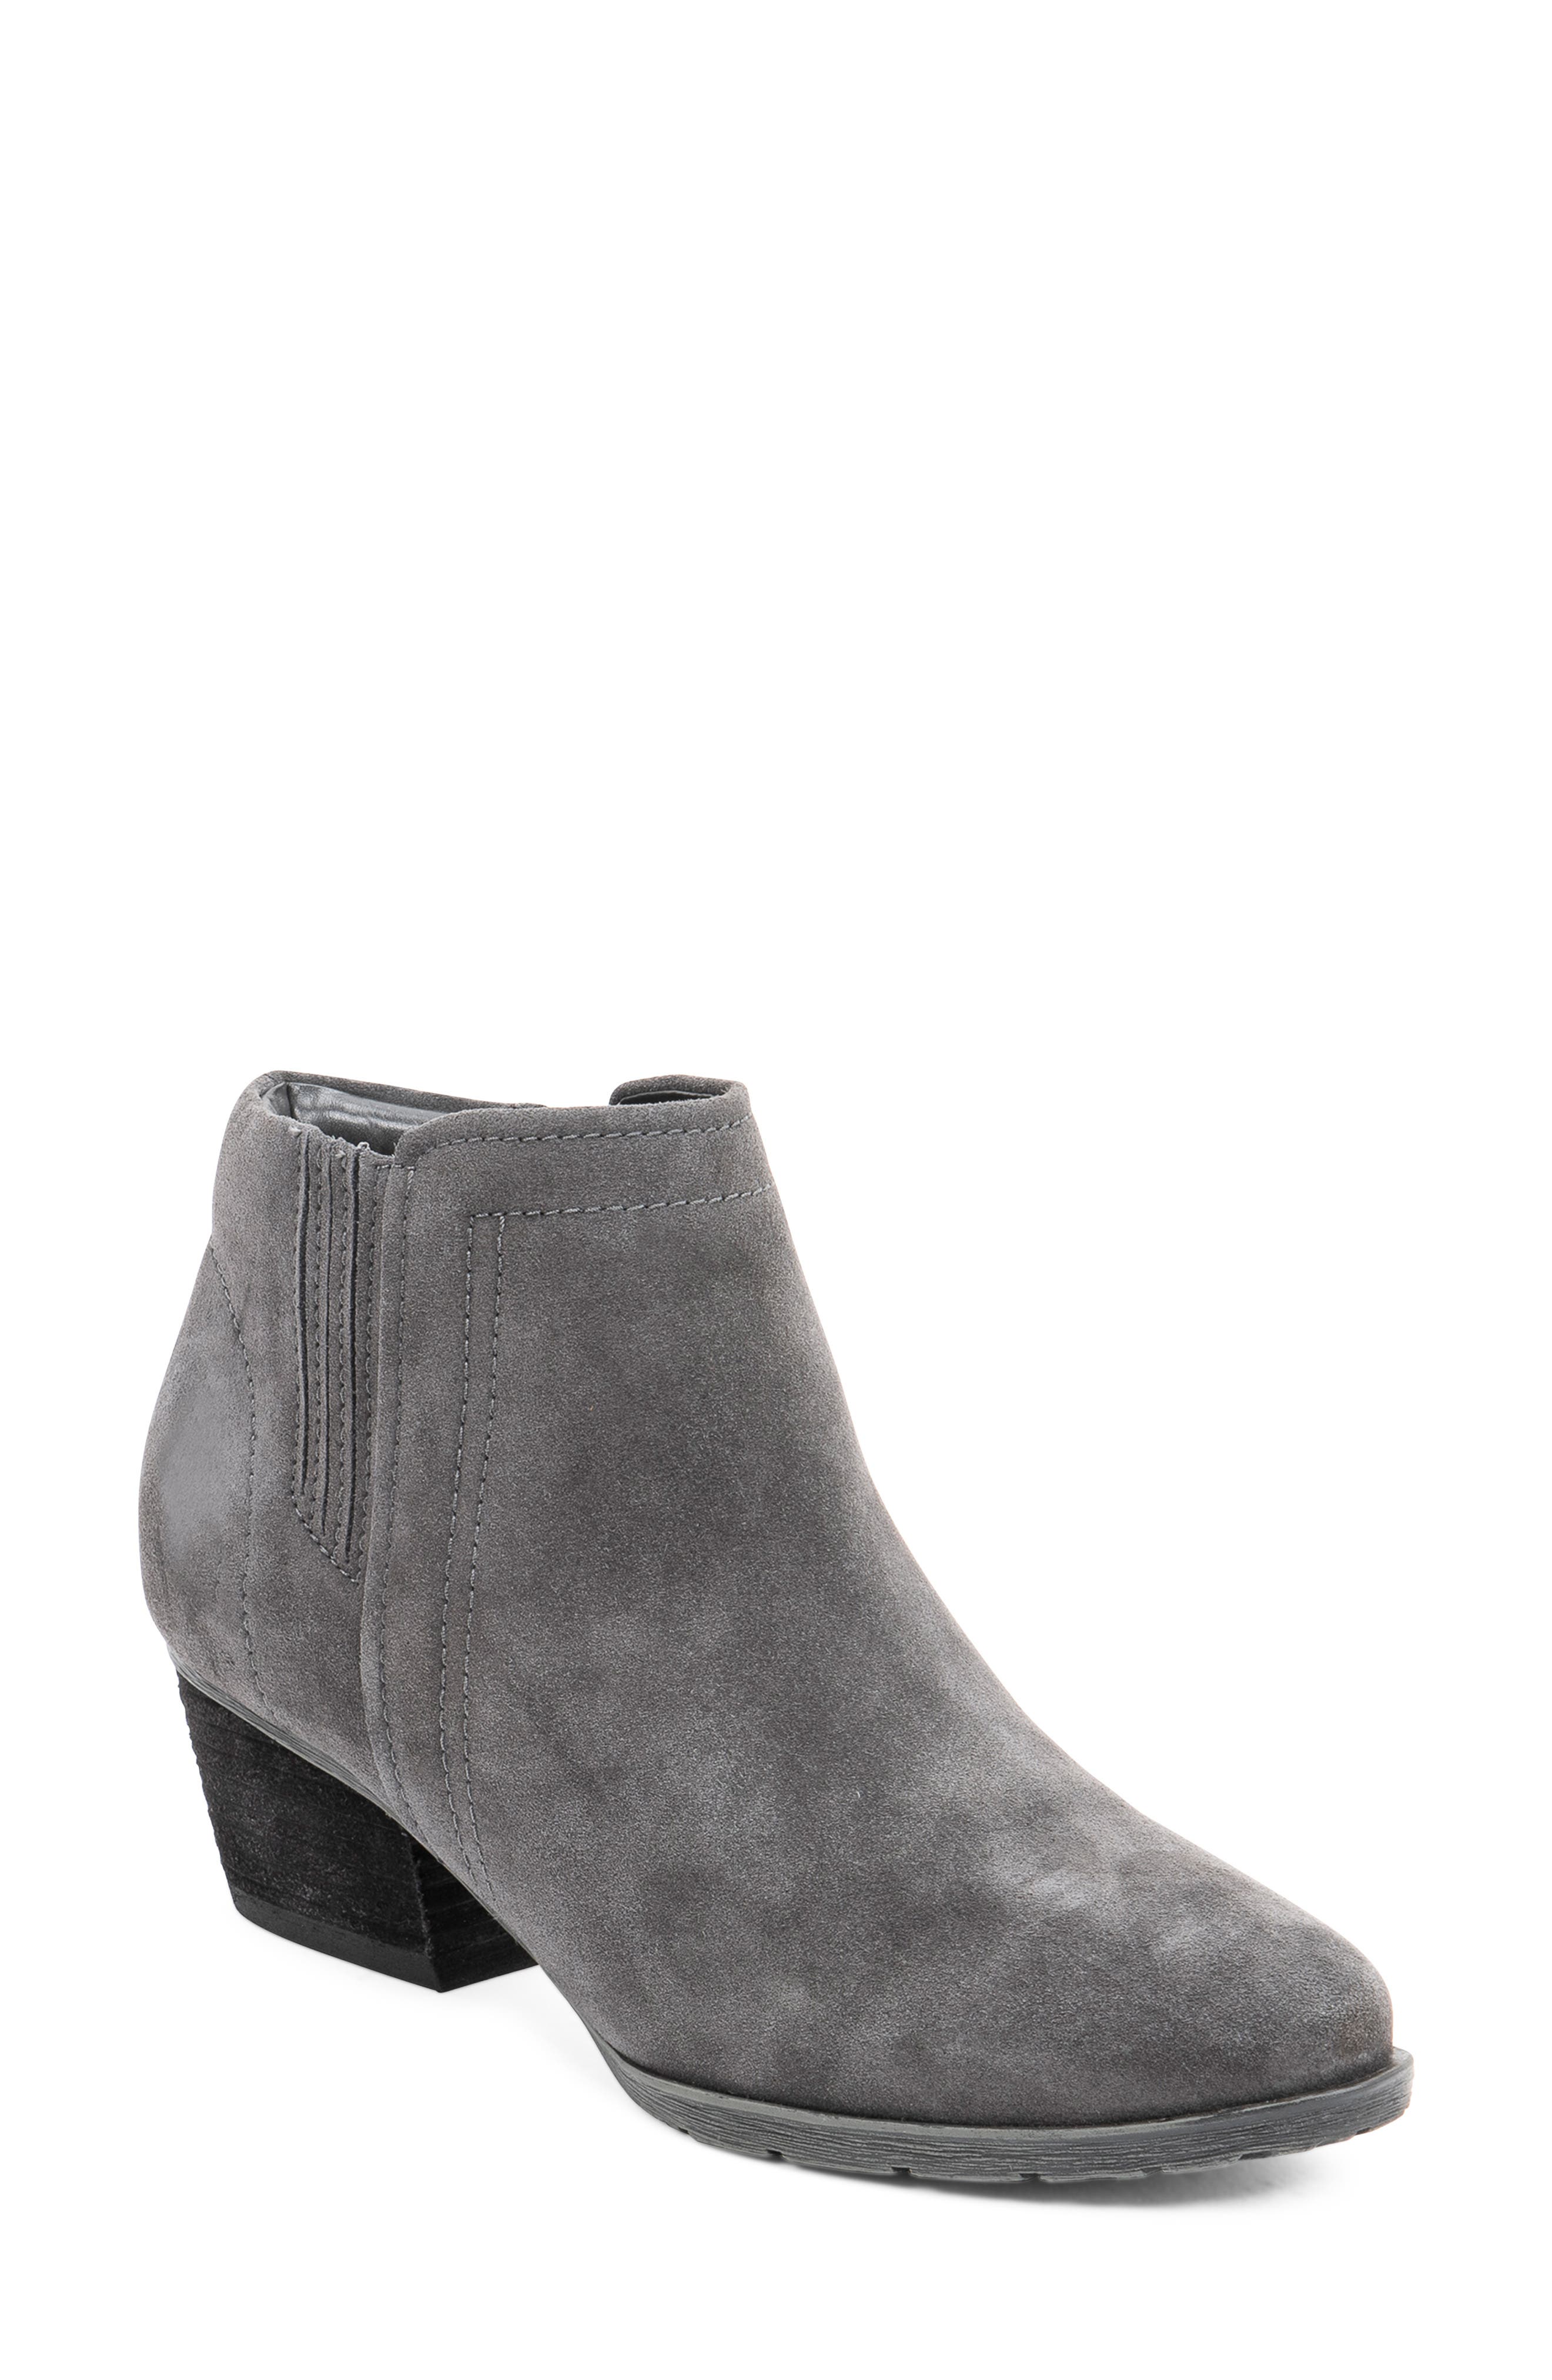 grey suede boots womens